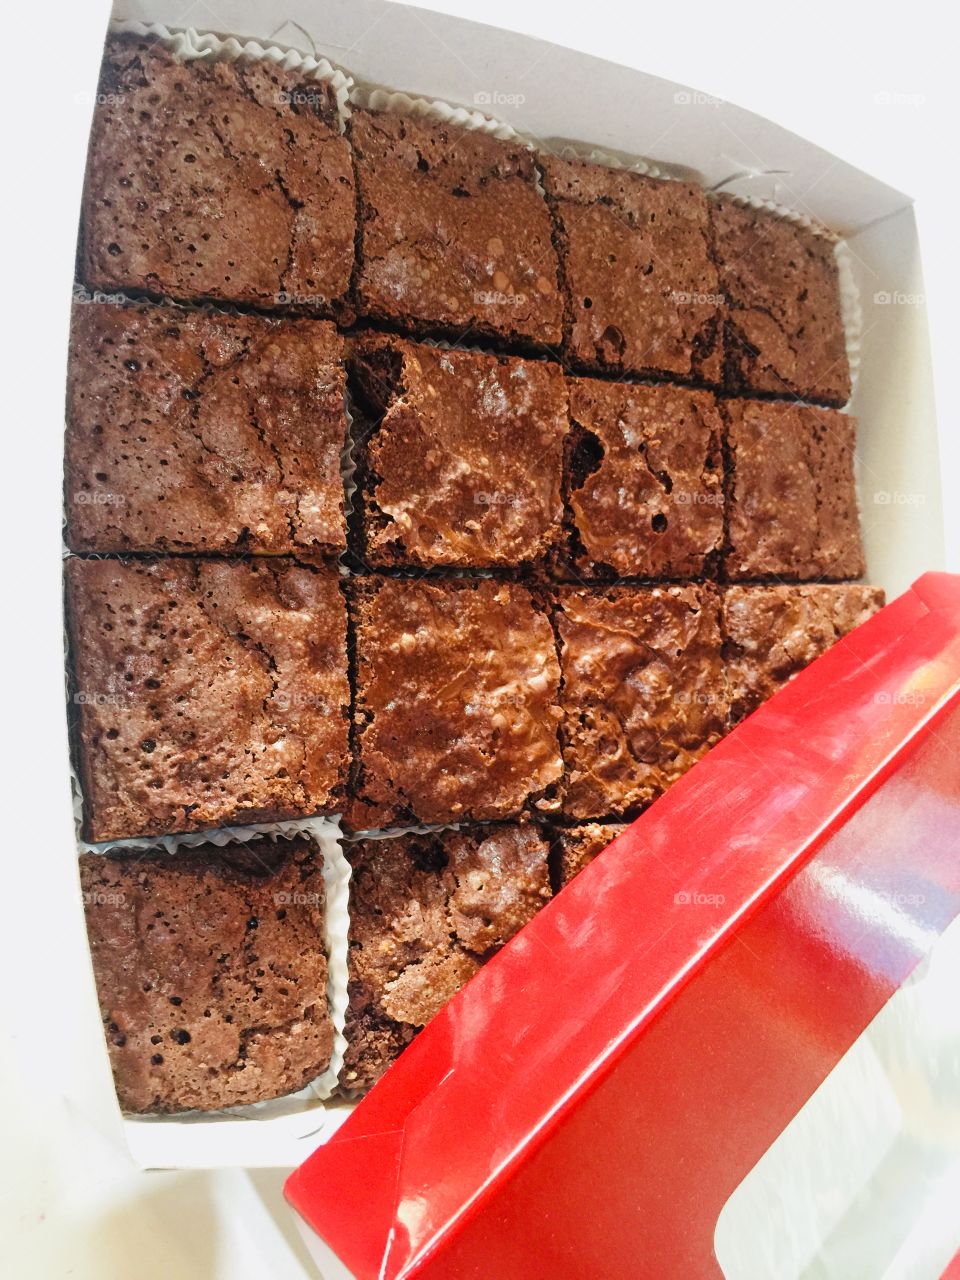 Life is like a box of chocolate brownies you’ll never know what you’re gonna get